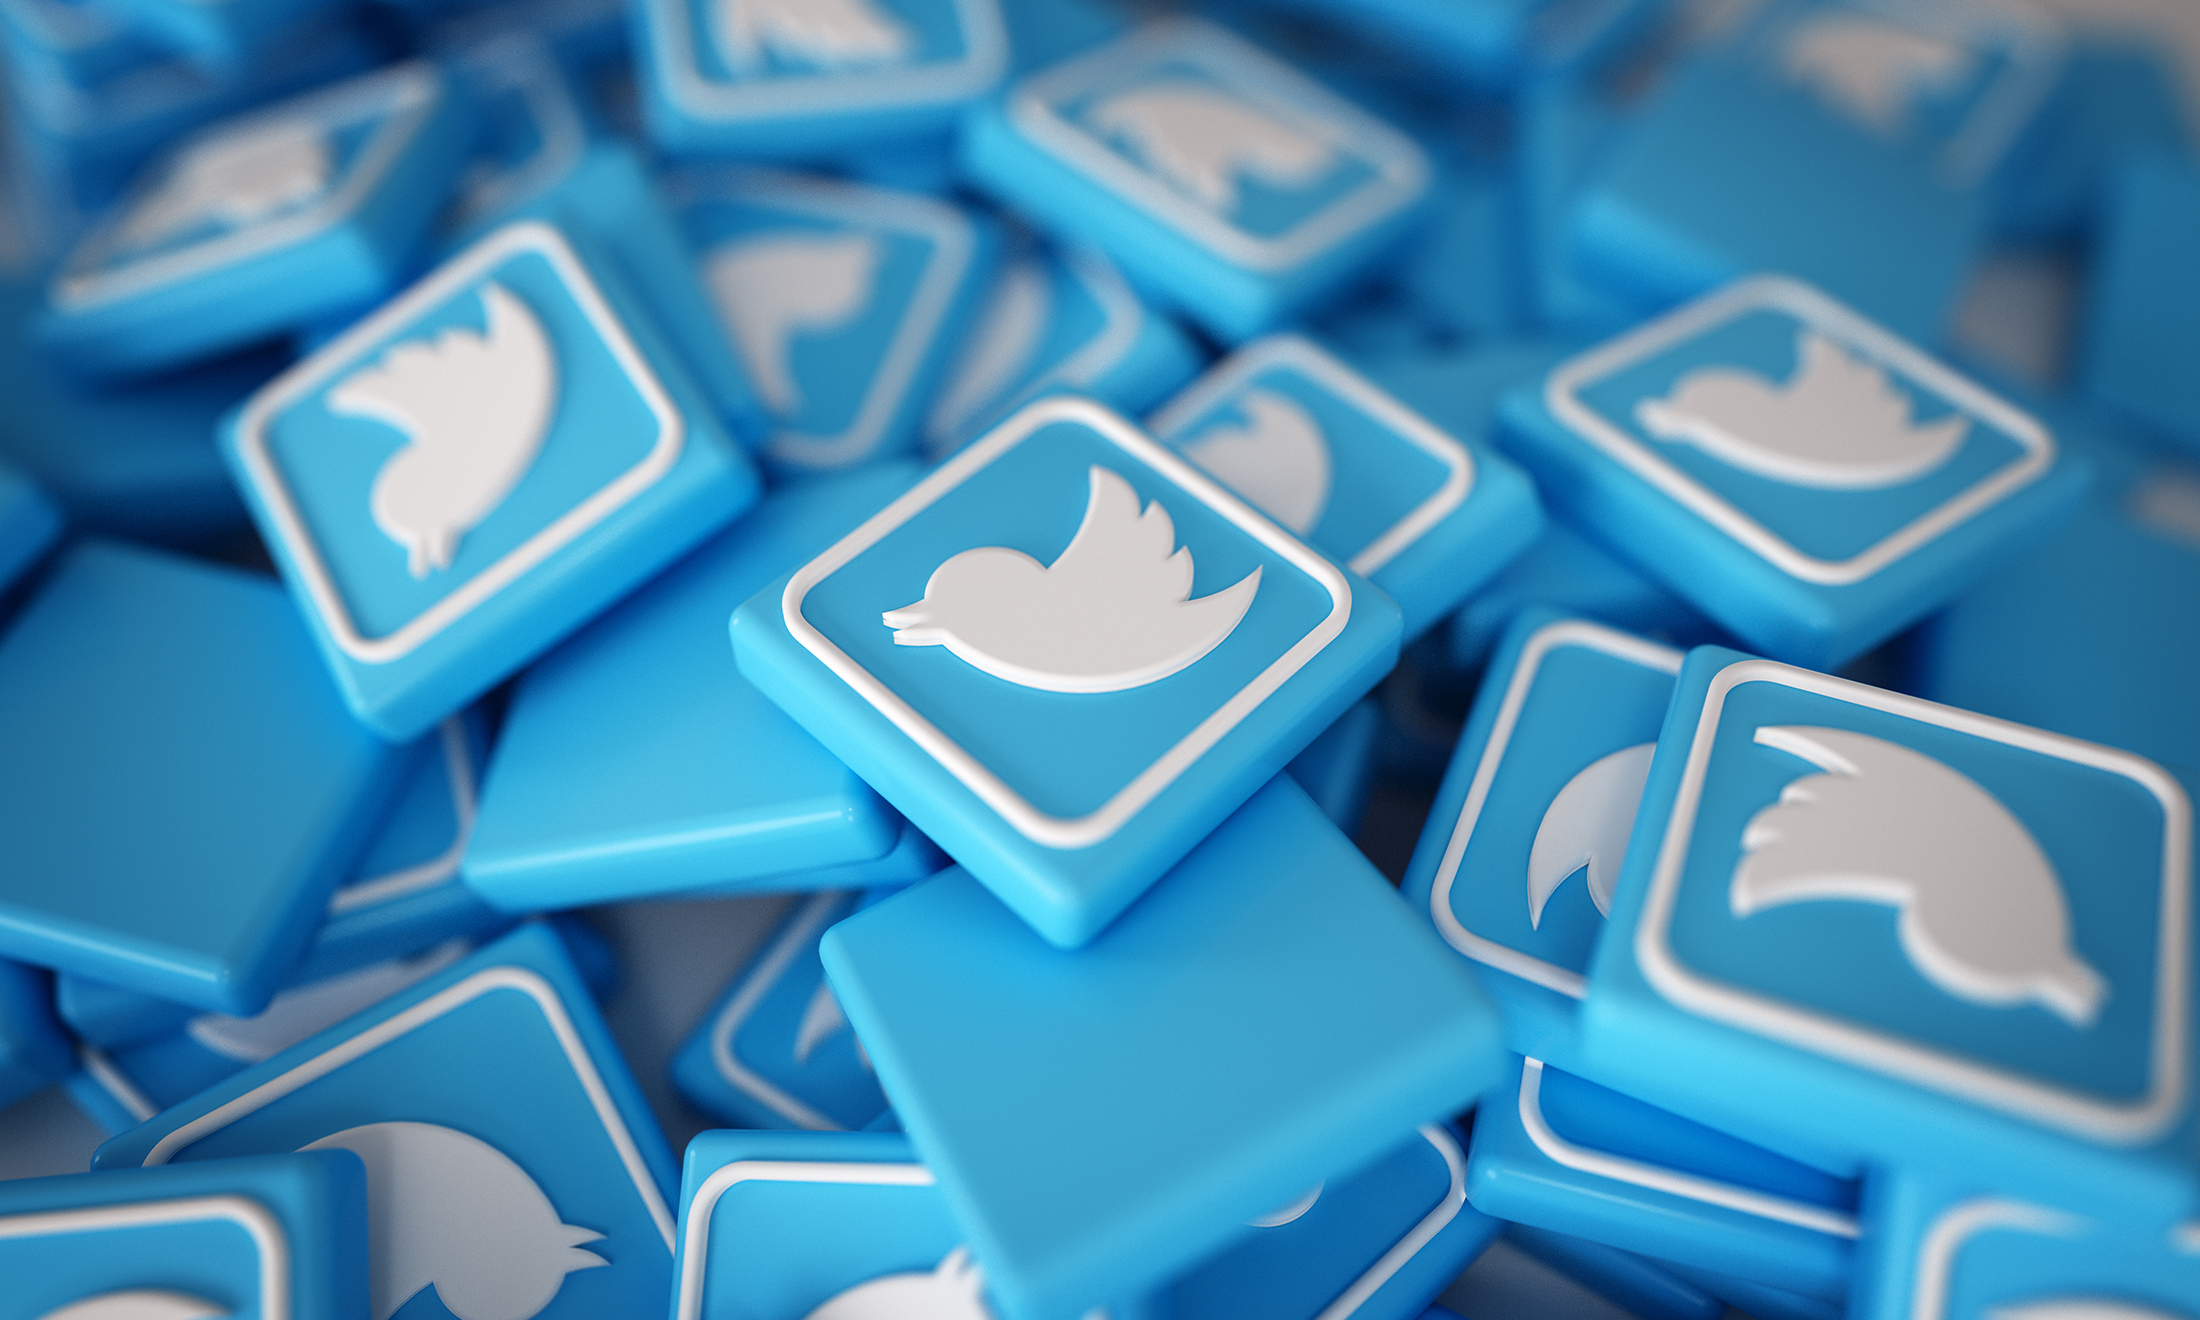 An image of a pile of 3D Twitter logos.